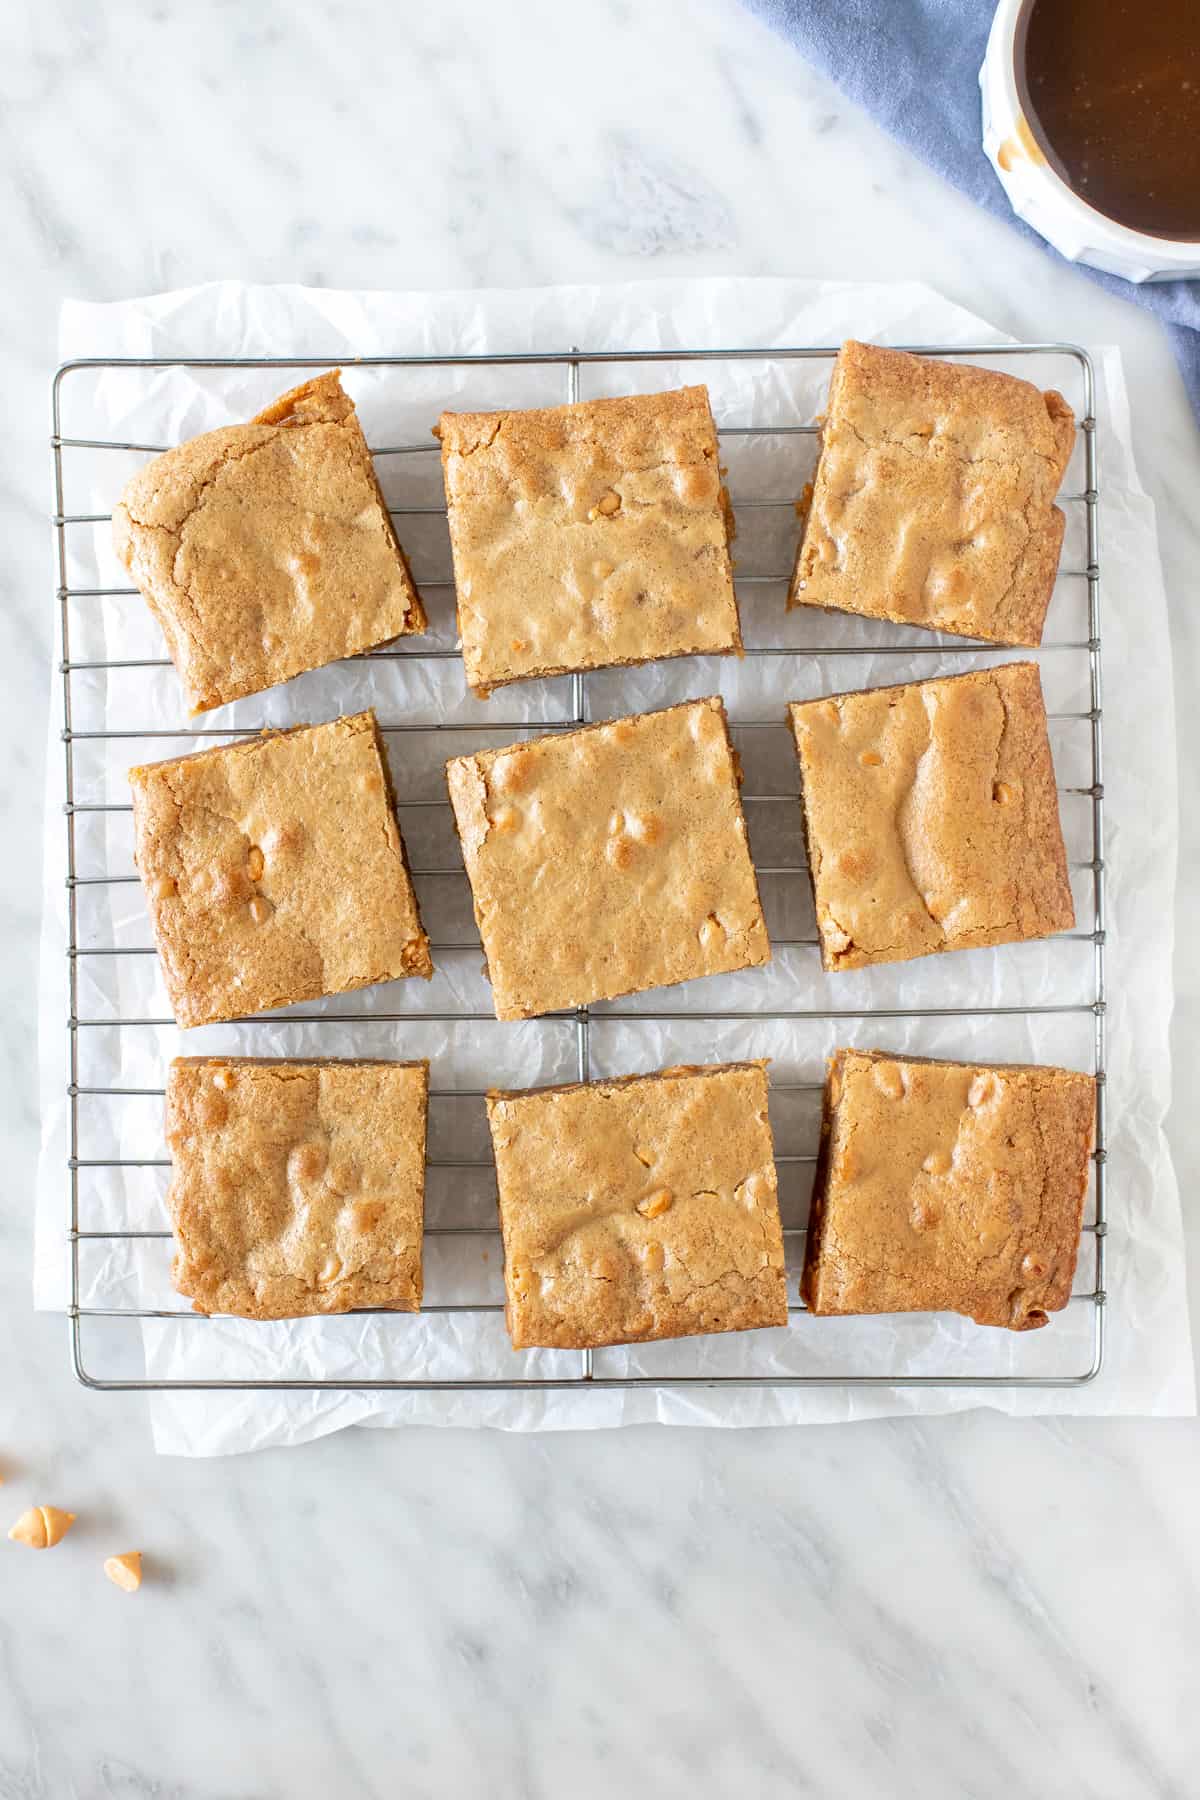 9 blondies on a cooling rack.